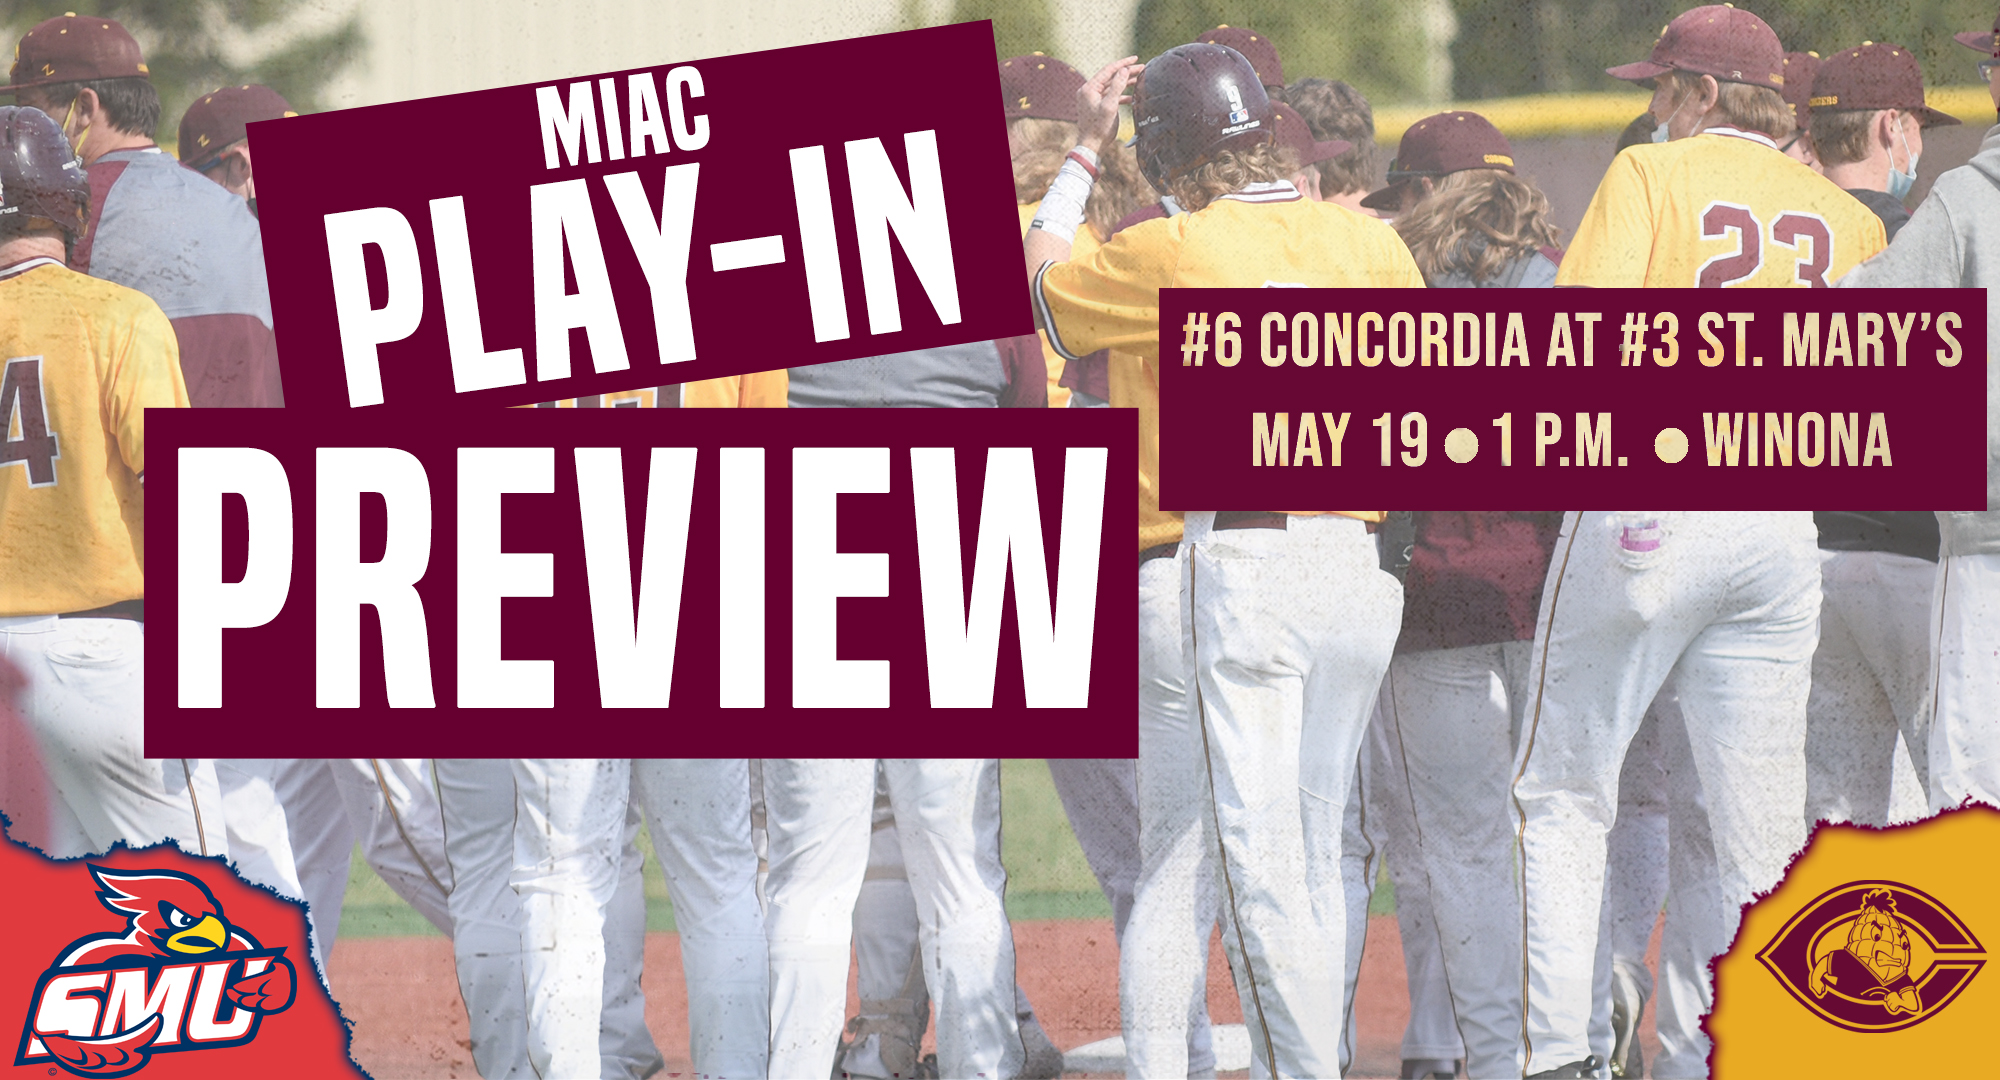 No.6 seed Concordia will face No.3 seed St. Mary's in one of the two the play-in games of the MIAC baseball playoffs on Wednesday, May 19 at 1 p.m. in Winona.